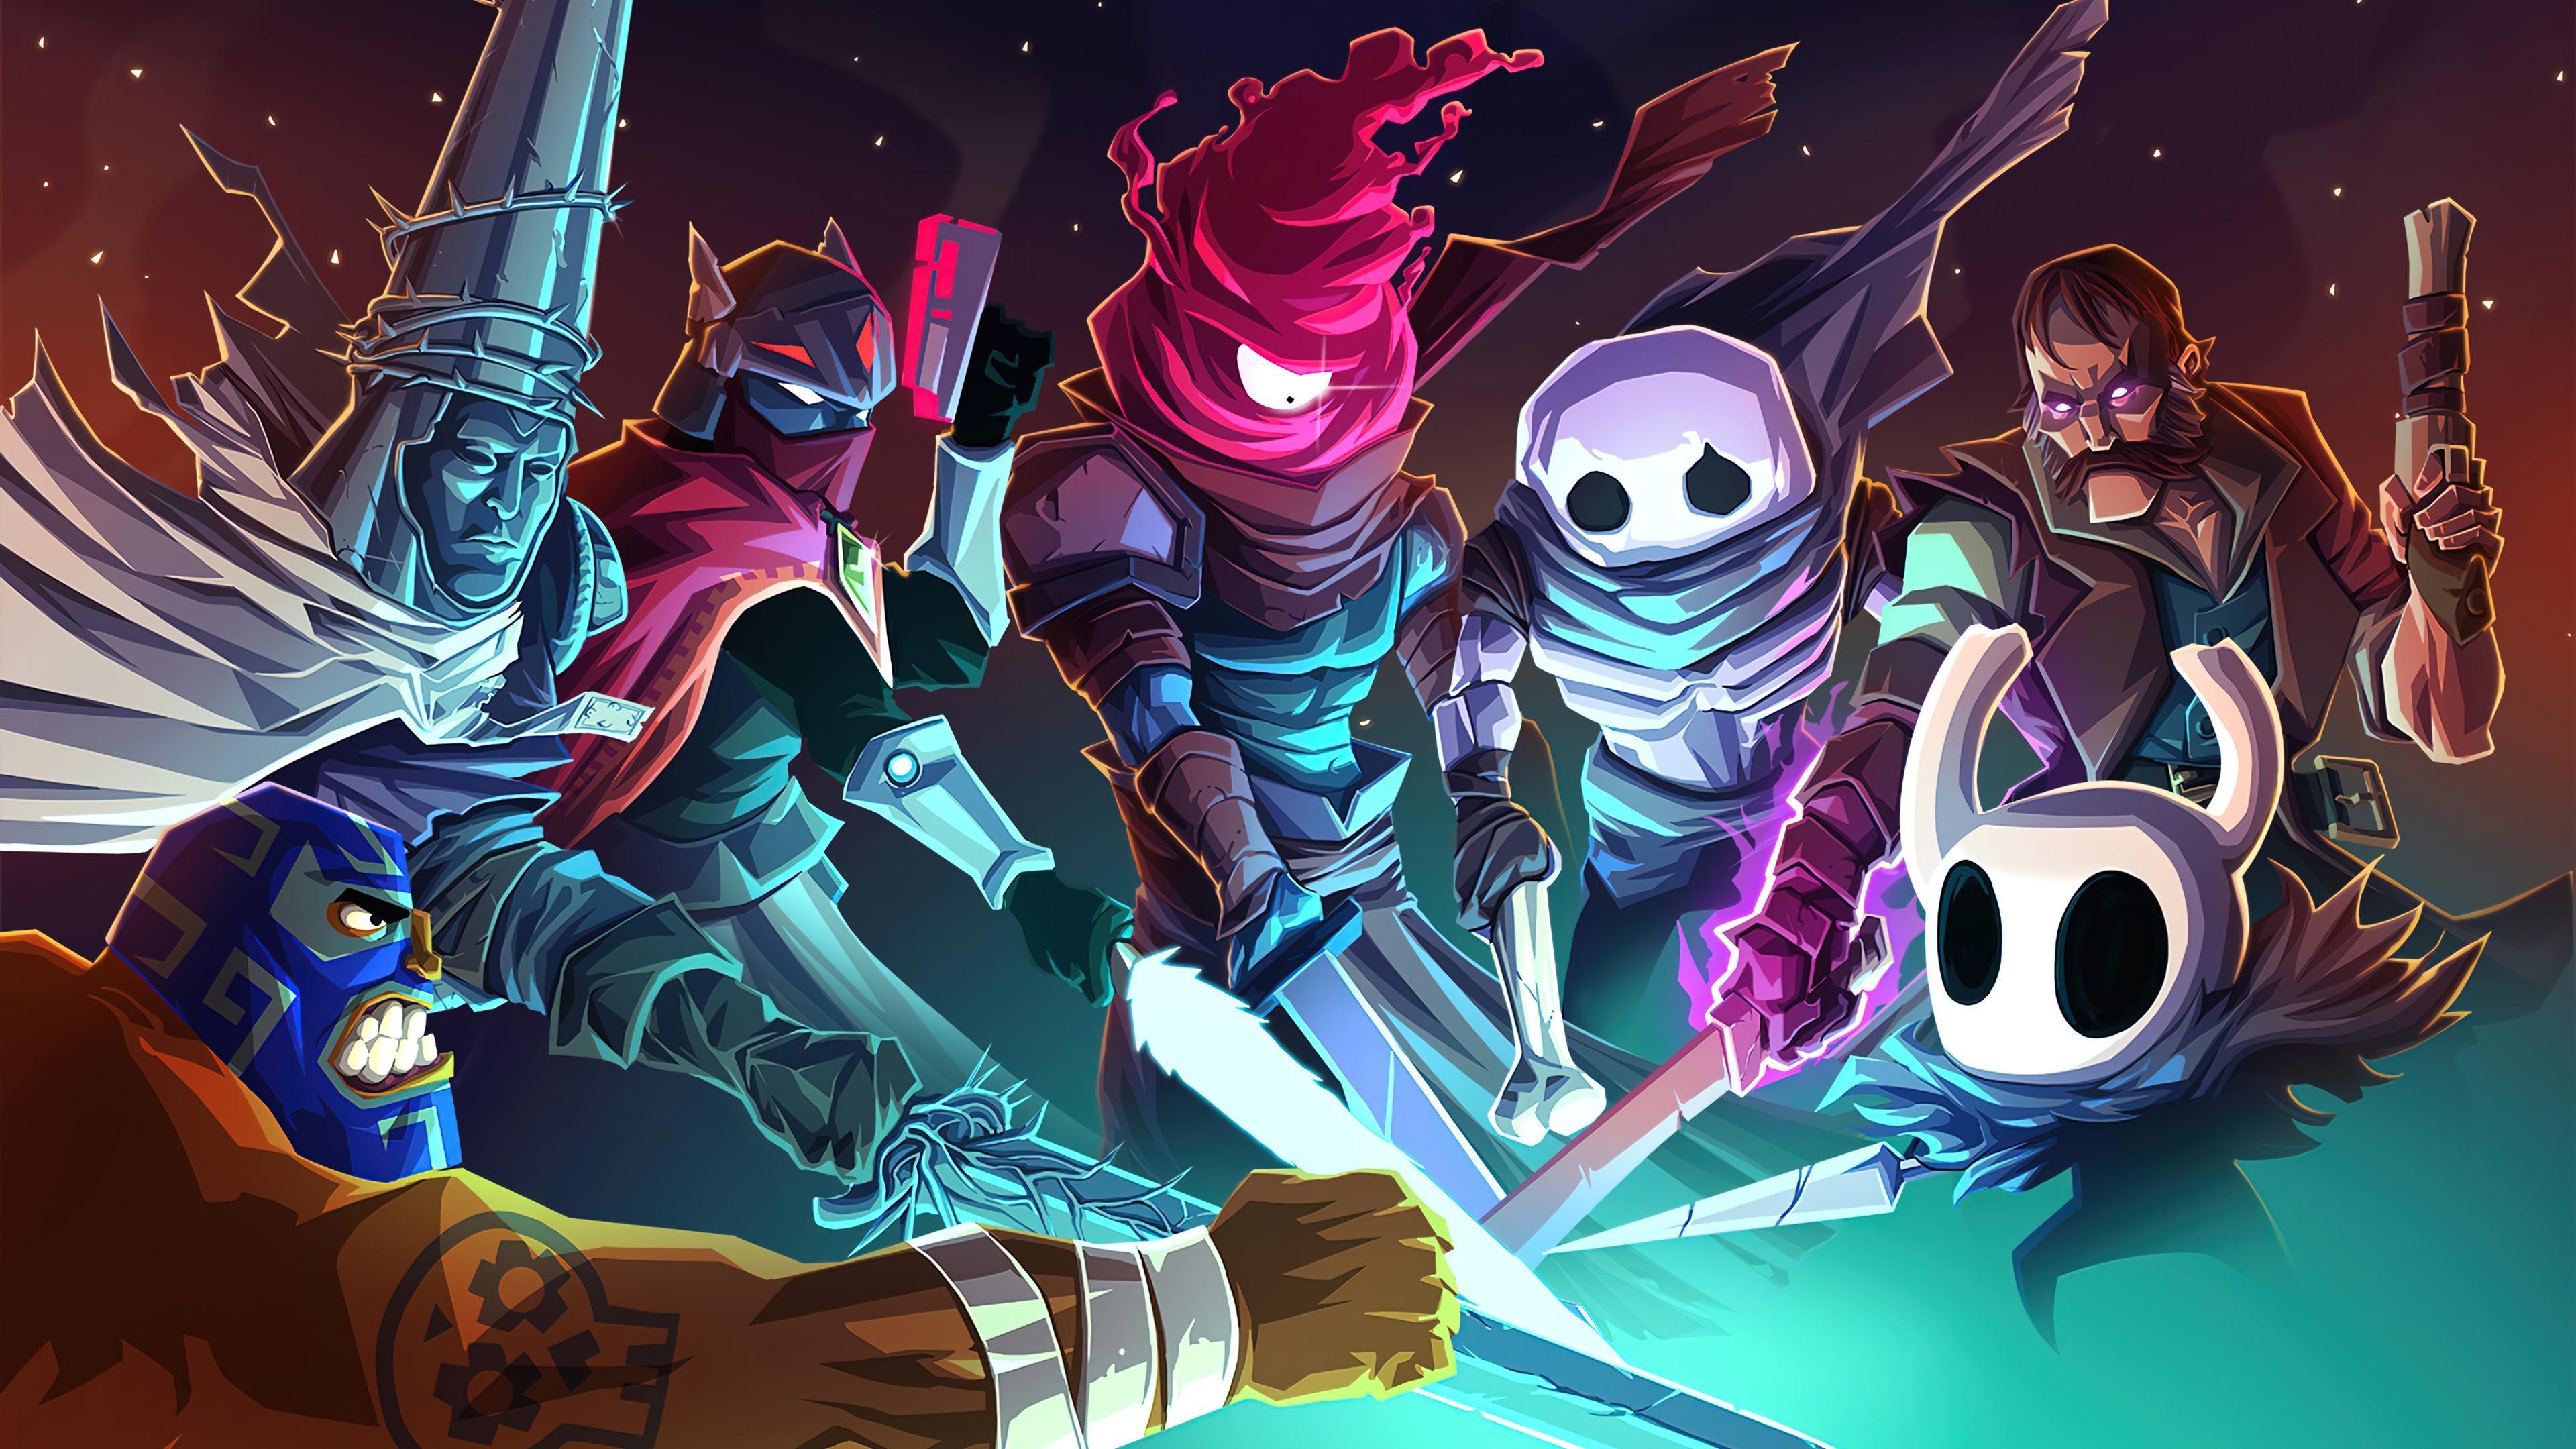 HD wallpaper, Dead Cells, Game, 4K, Everyone Is Here